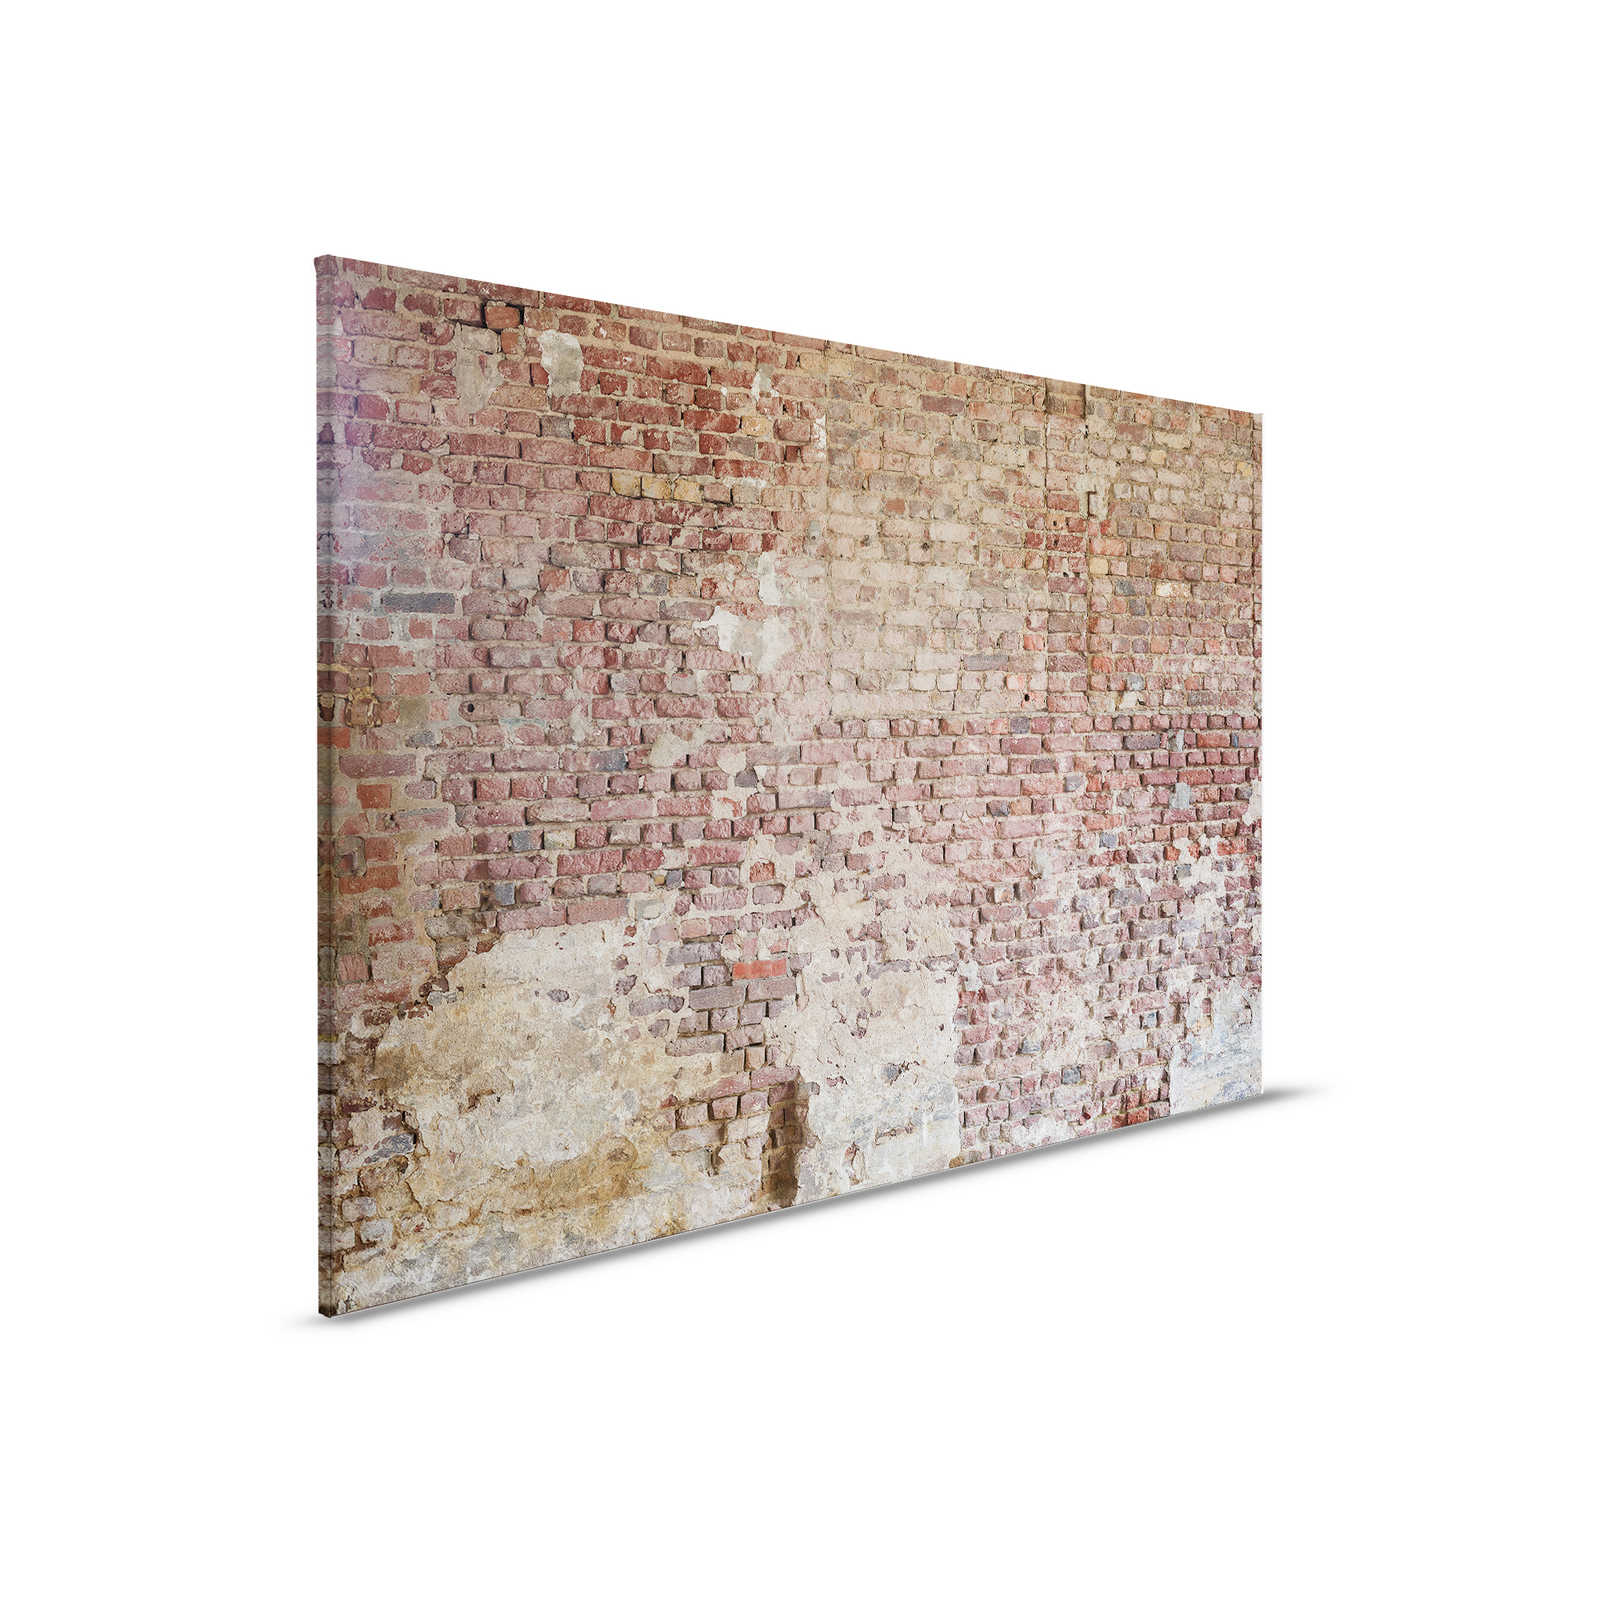         Vintage Style Brick Wall Canvas Painting - 0.90 m x 0.60 m
    